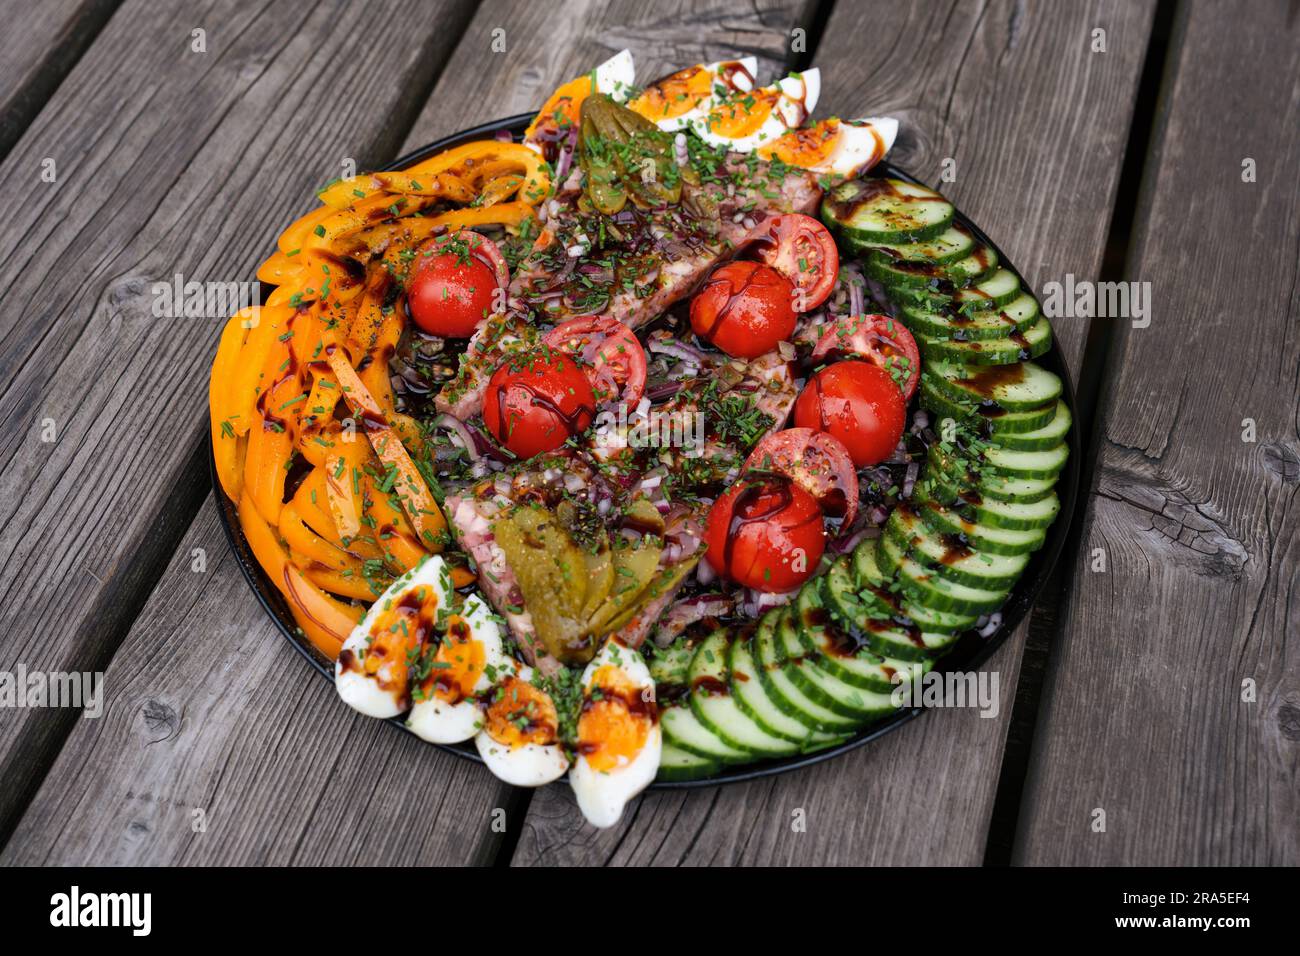 brawn with green cucumber, boiled egg,red onions, cherry tomatoes,yellow paprika, olive oil, balsamic vinegar, chives,  served on a rustic wood table Stock Photo